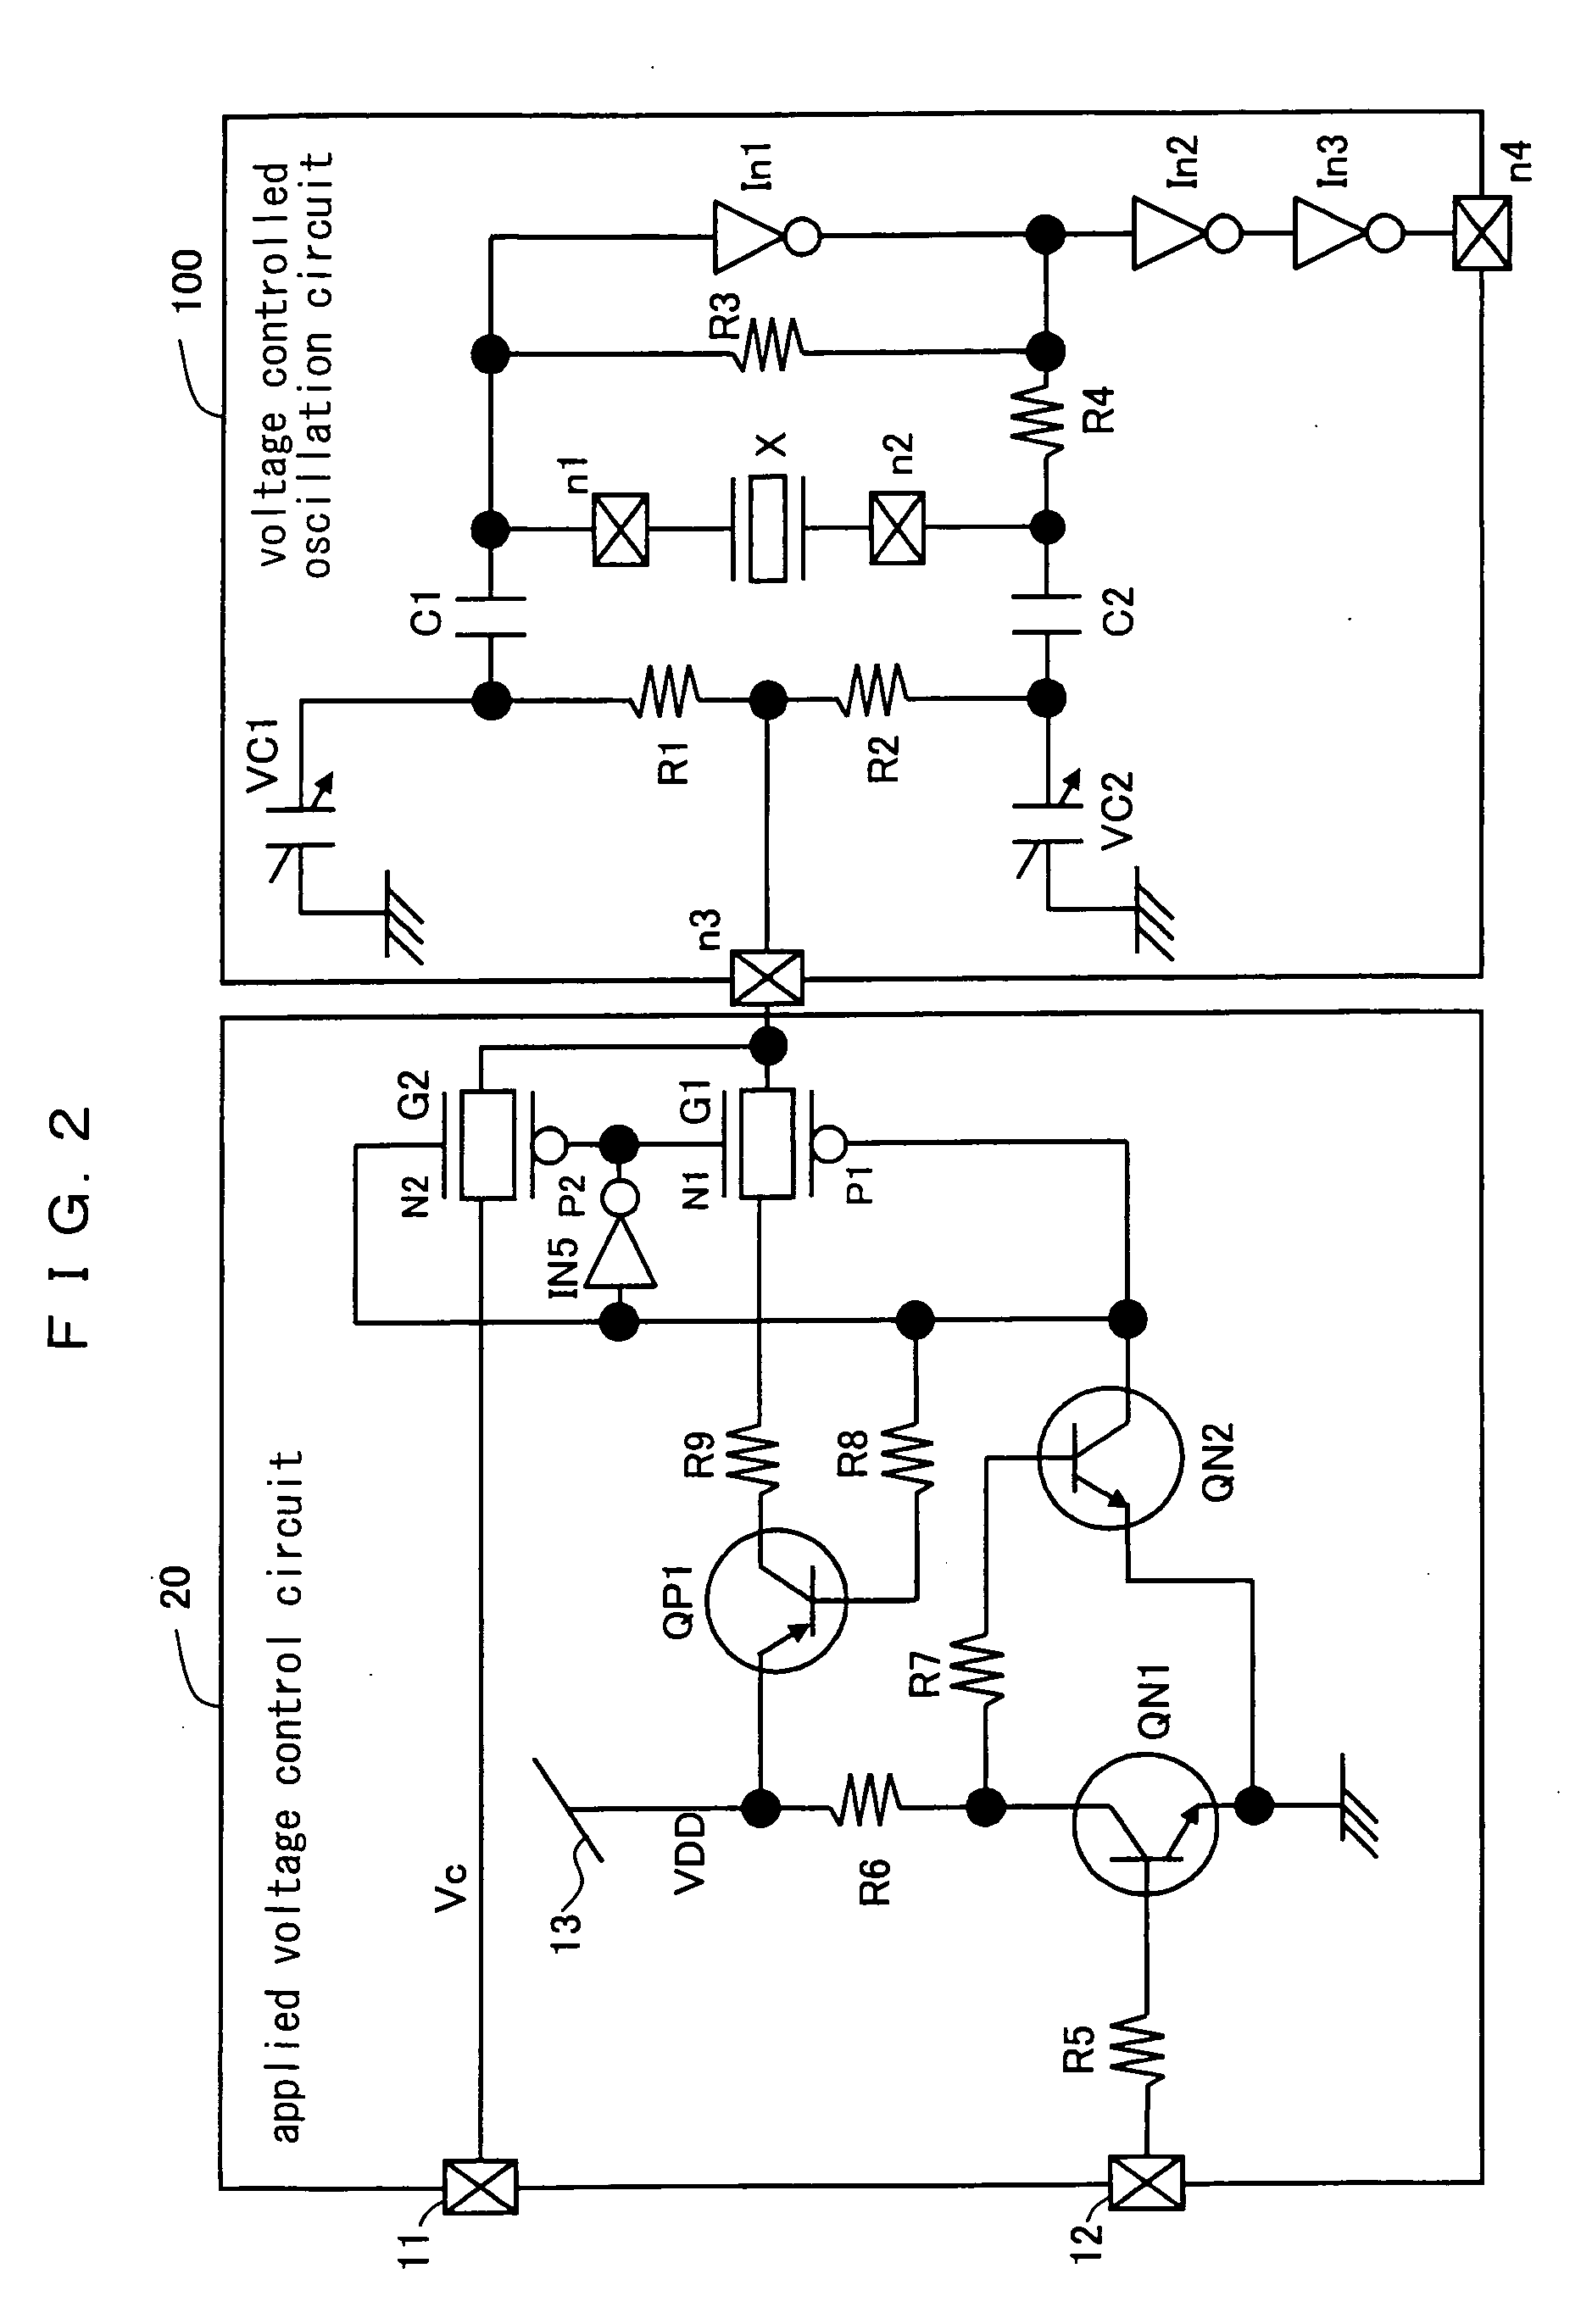 Applied voltage control circuit for voltage controlled oscillation circuit